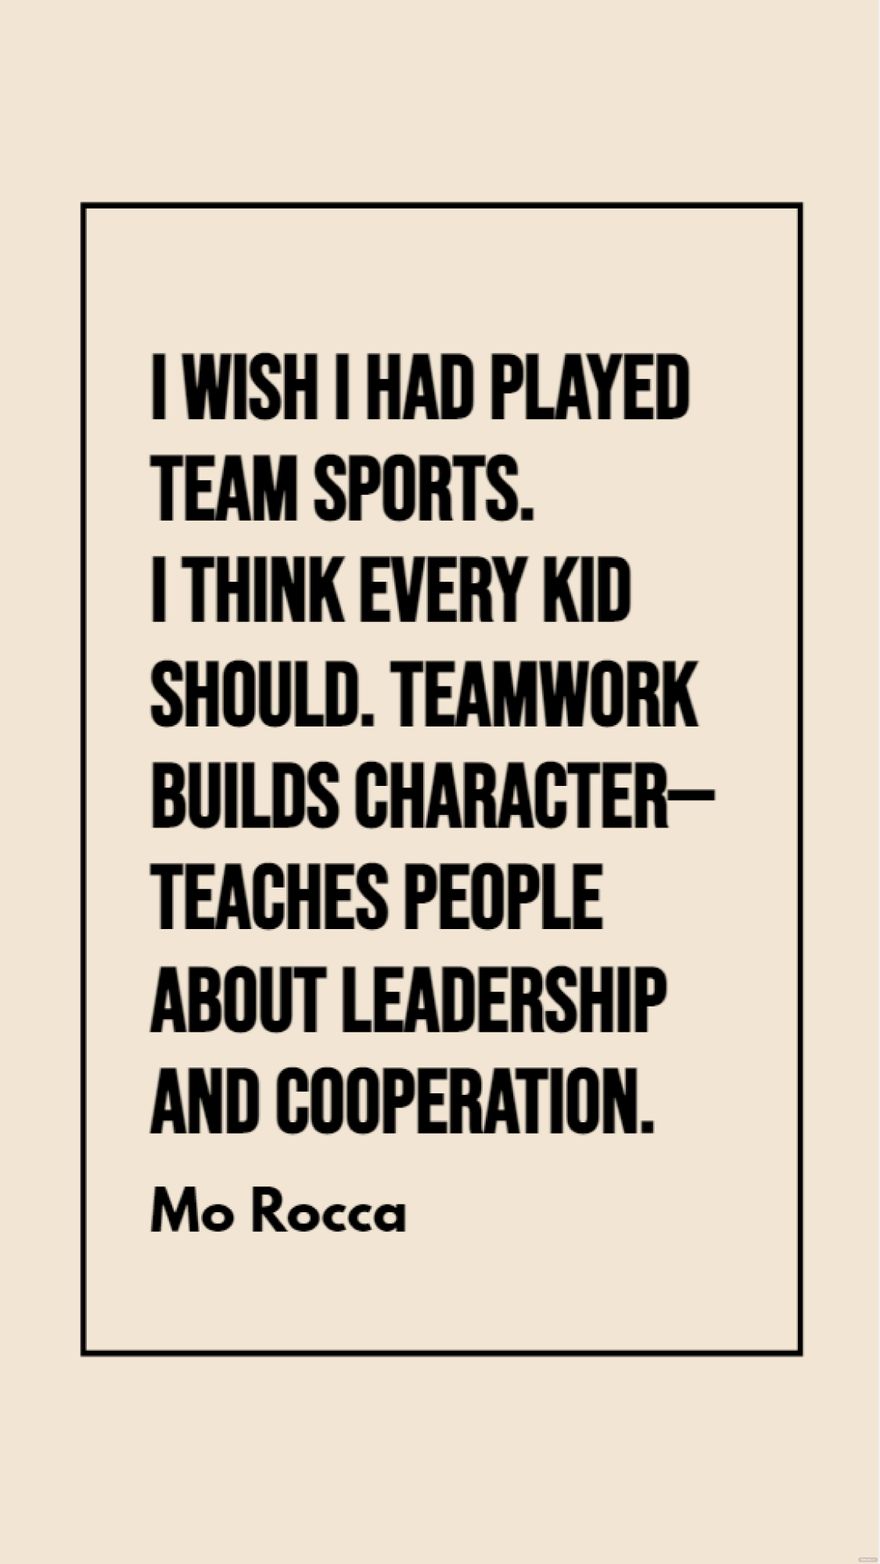 Free Mo Rocca - I wish I had played team sports. I think every kid should. Teamwork builds character - teaches people about leadership and cooperation. in JPG